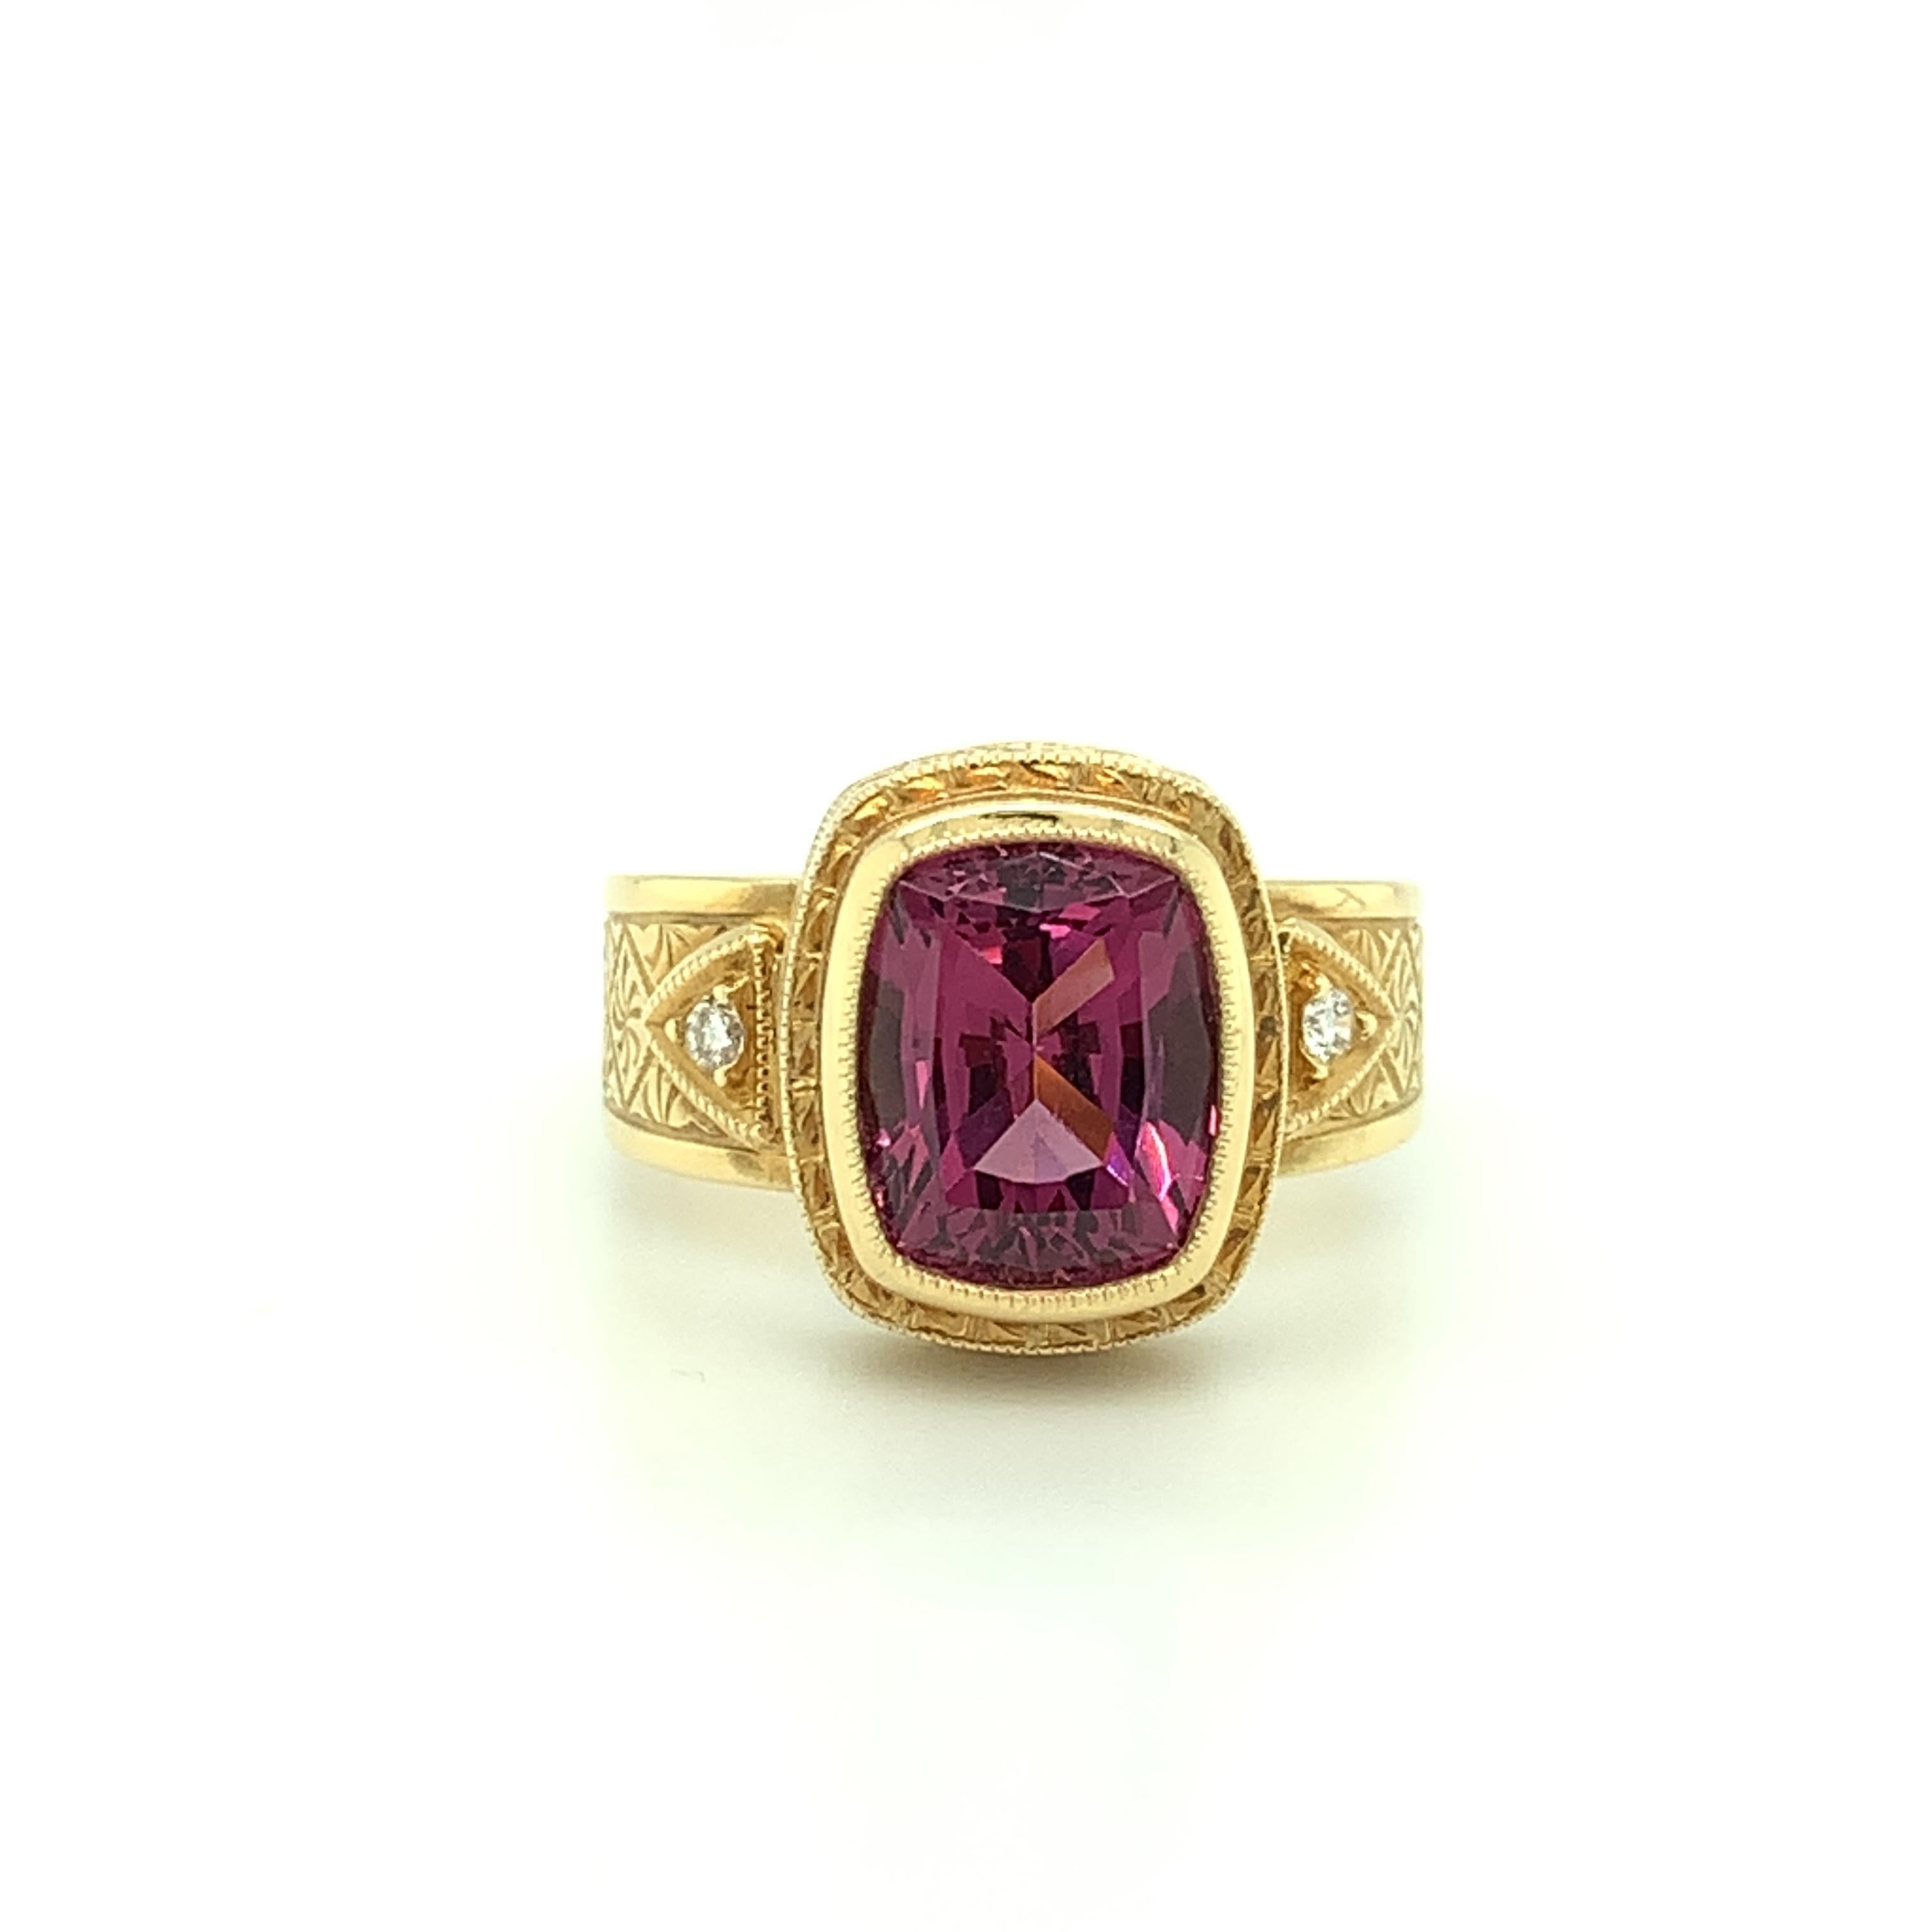 A gorgeous 4.30 carat raspberry-red rhodolite garnet is featured in this handsome ring. The cushion-cut center gem sits in an 18k yellow gold bezel that has been intricately hand engraved, displaying a level of artisanship and skill rarely seen